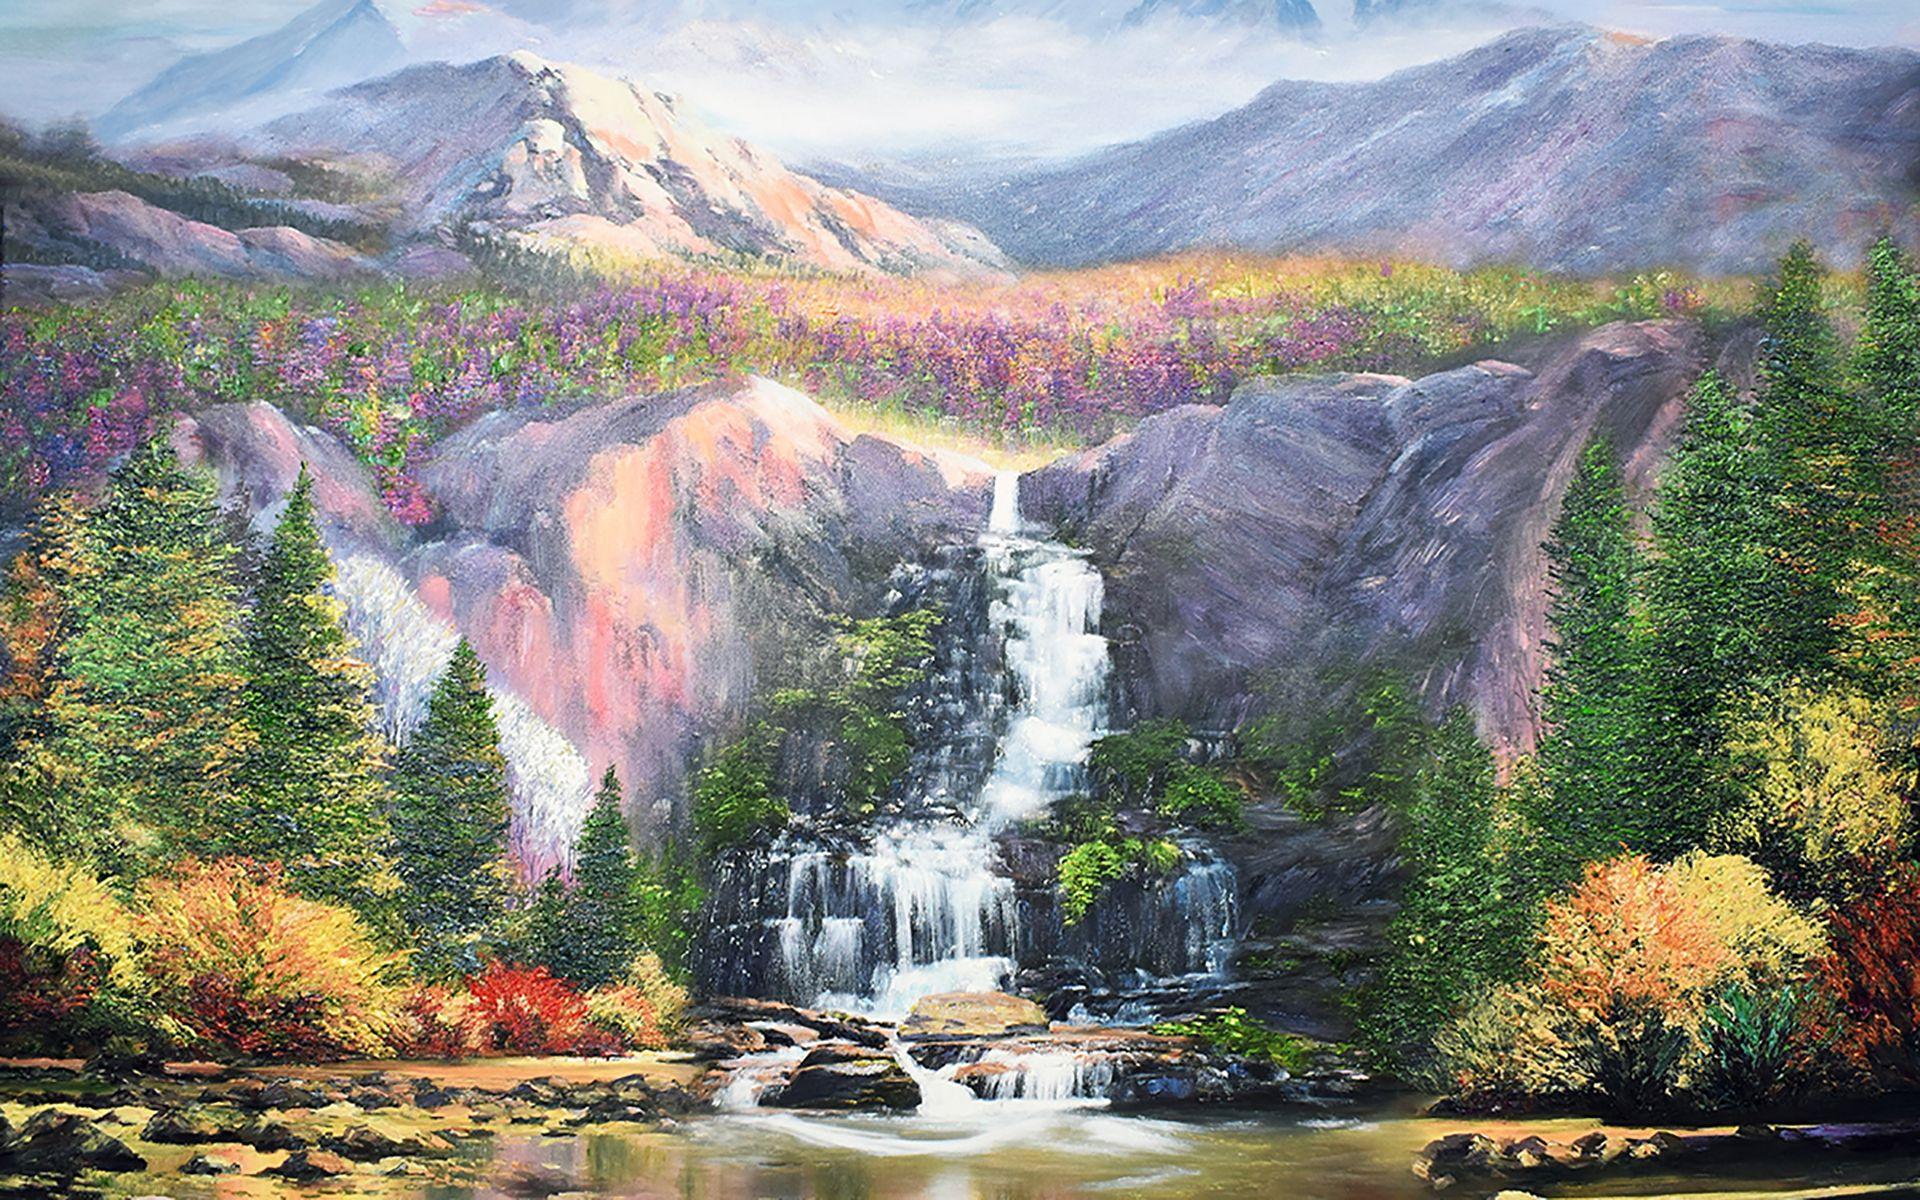 : â€œThis is another memory of the Denali in Alaska. Wildflowers abound as the earth is fed by the minerally nutritious mountain waters.â€    You can almost hear the cascade of water as the mountain stream becomes a lake. Featuring a reflective